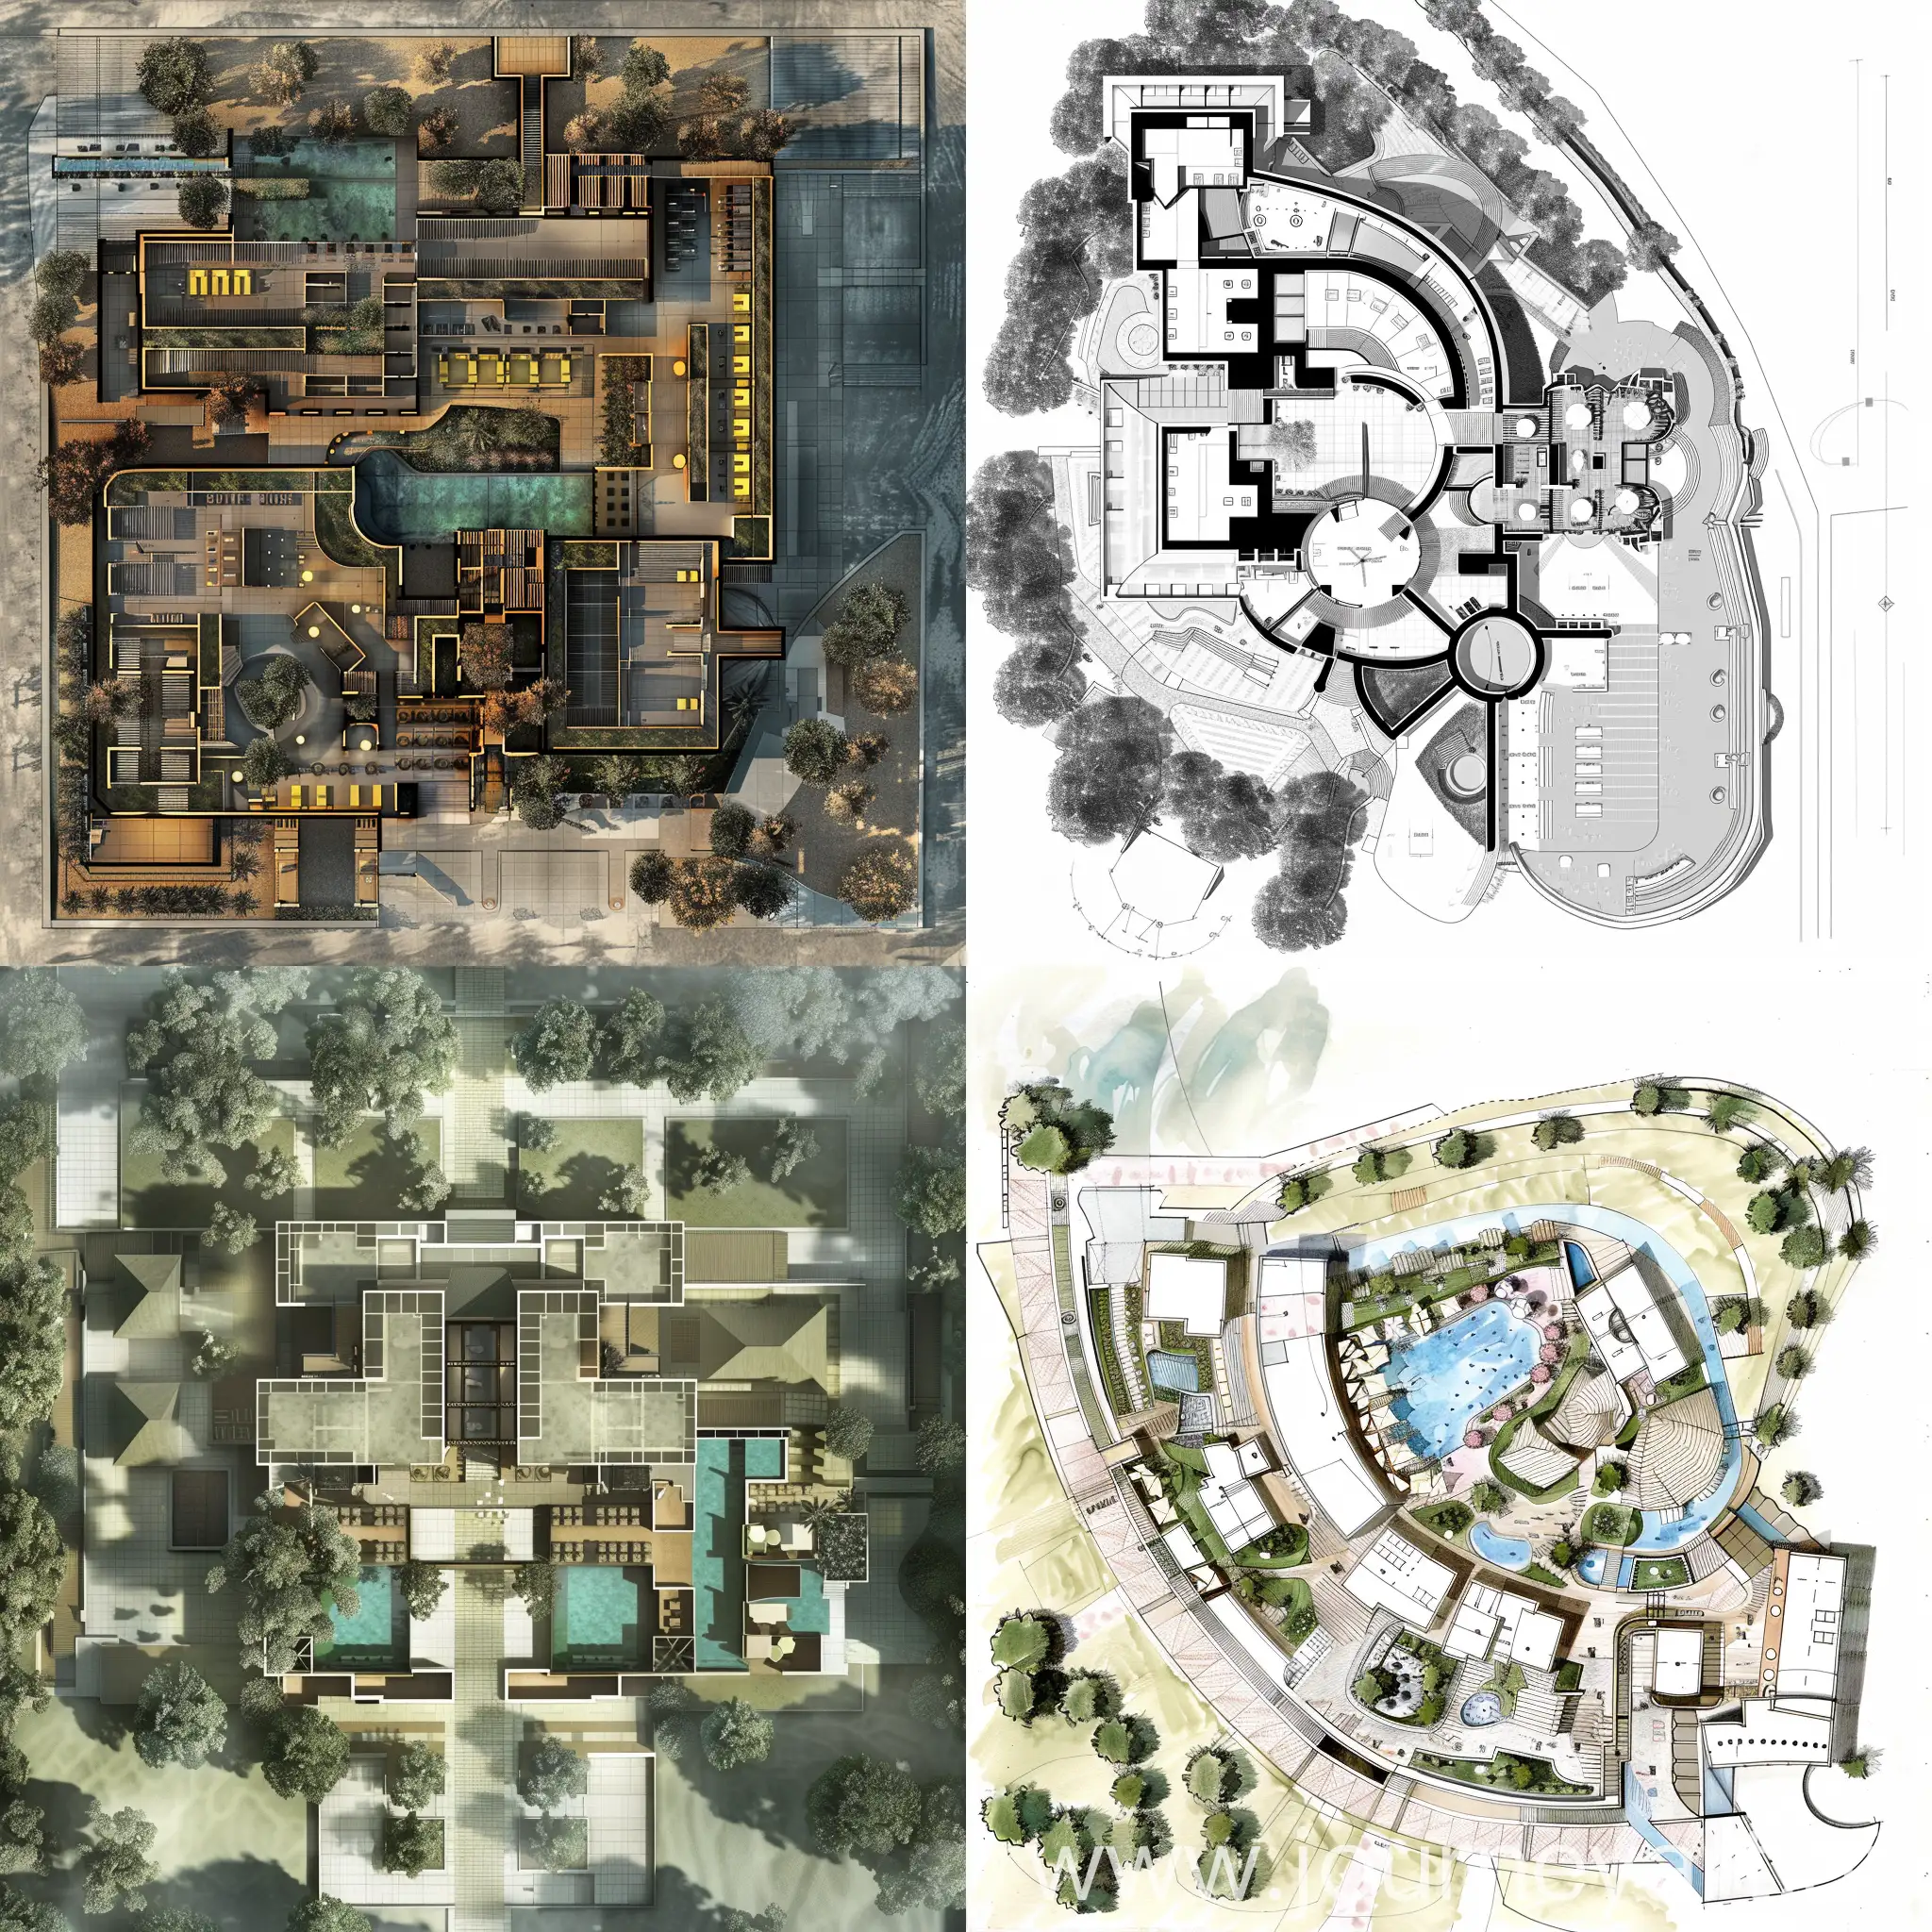 An architecture plan for a hotel